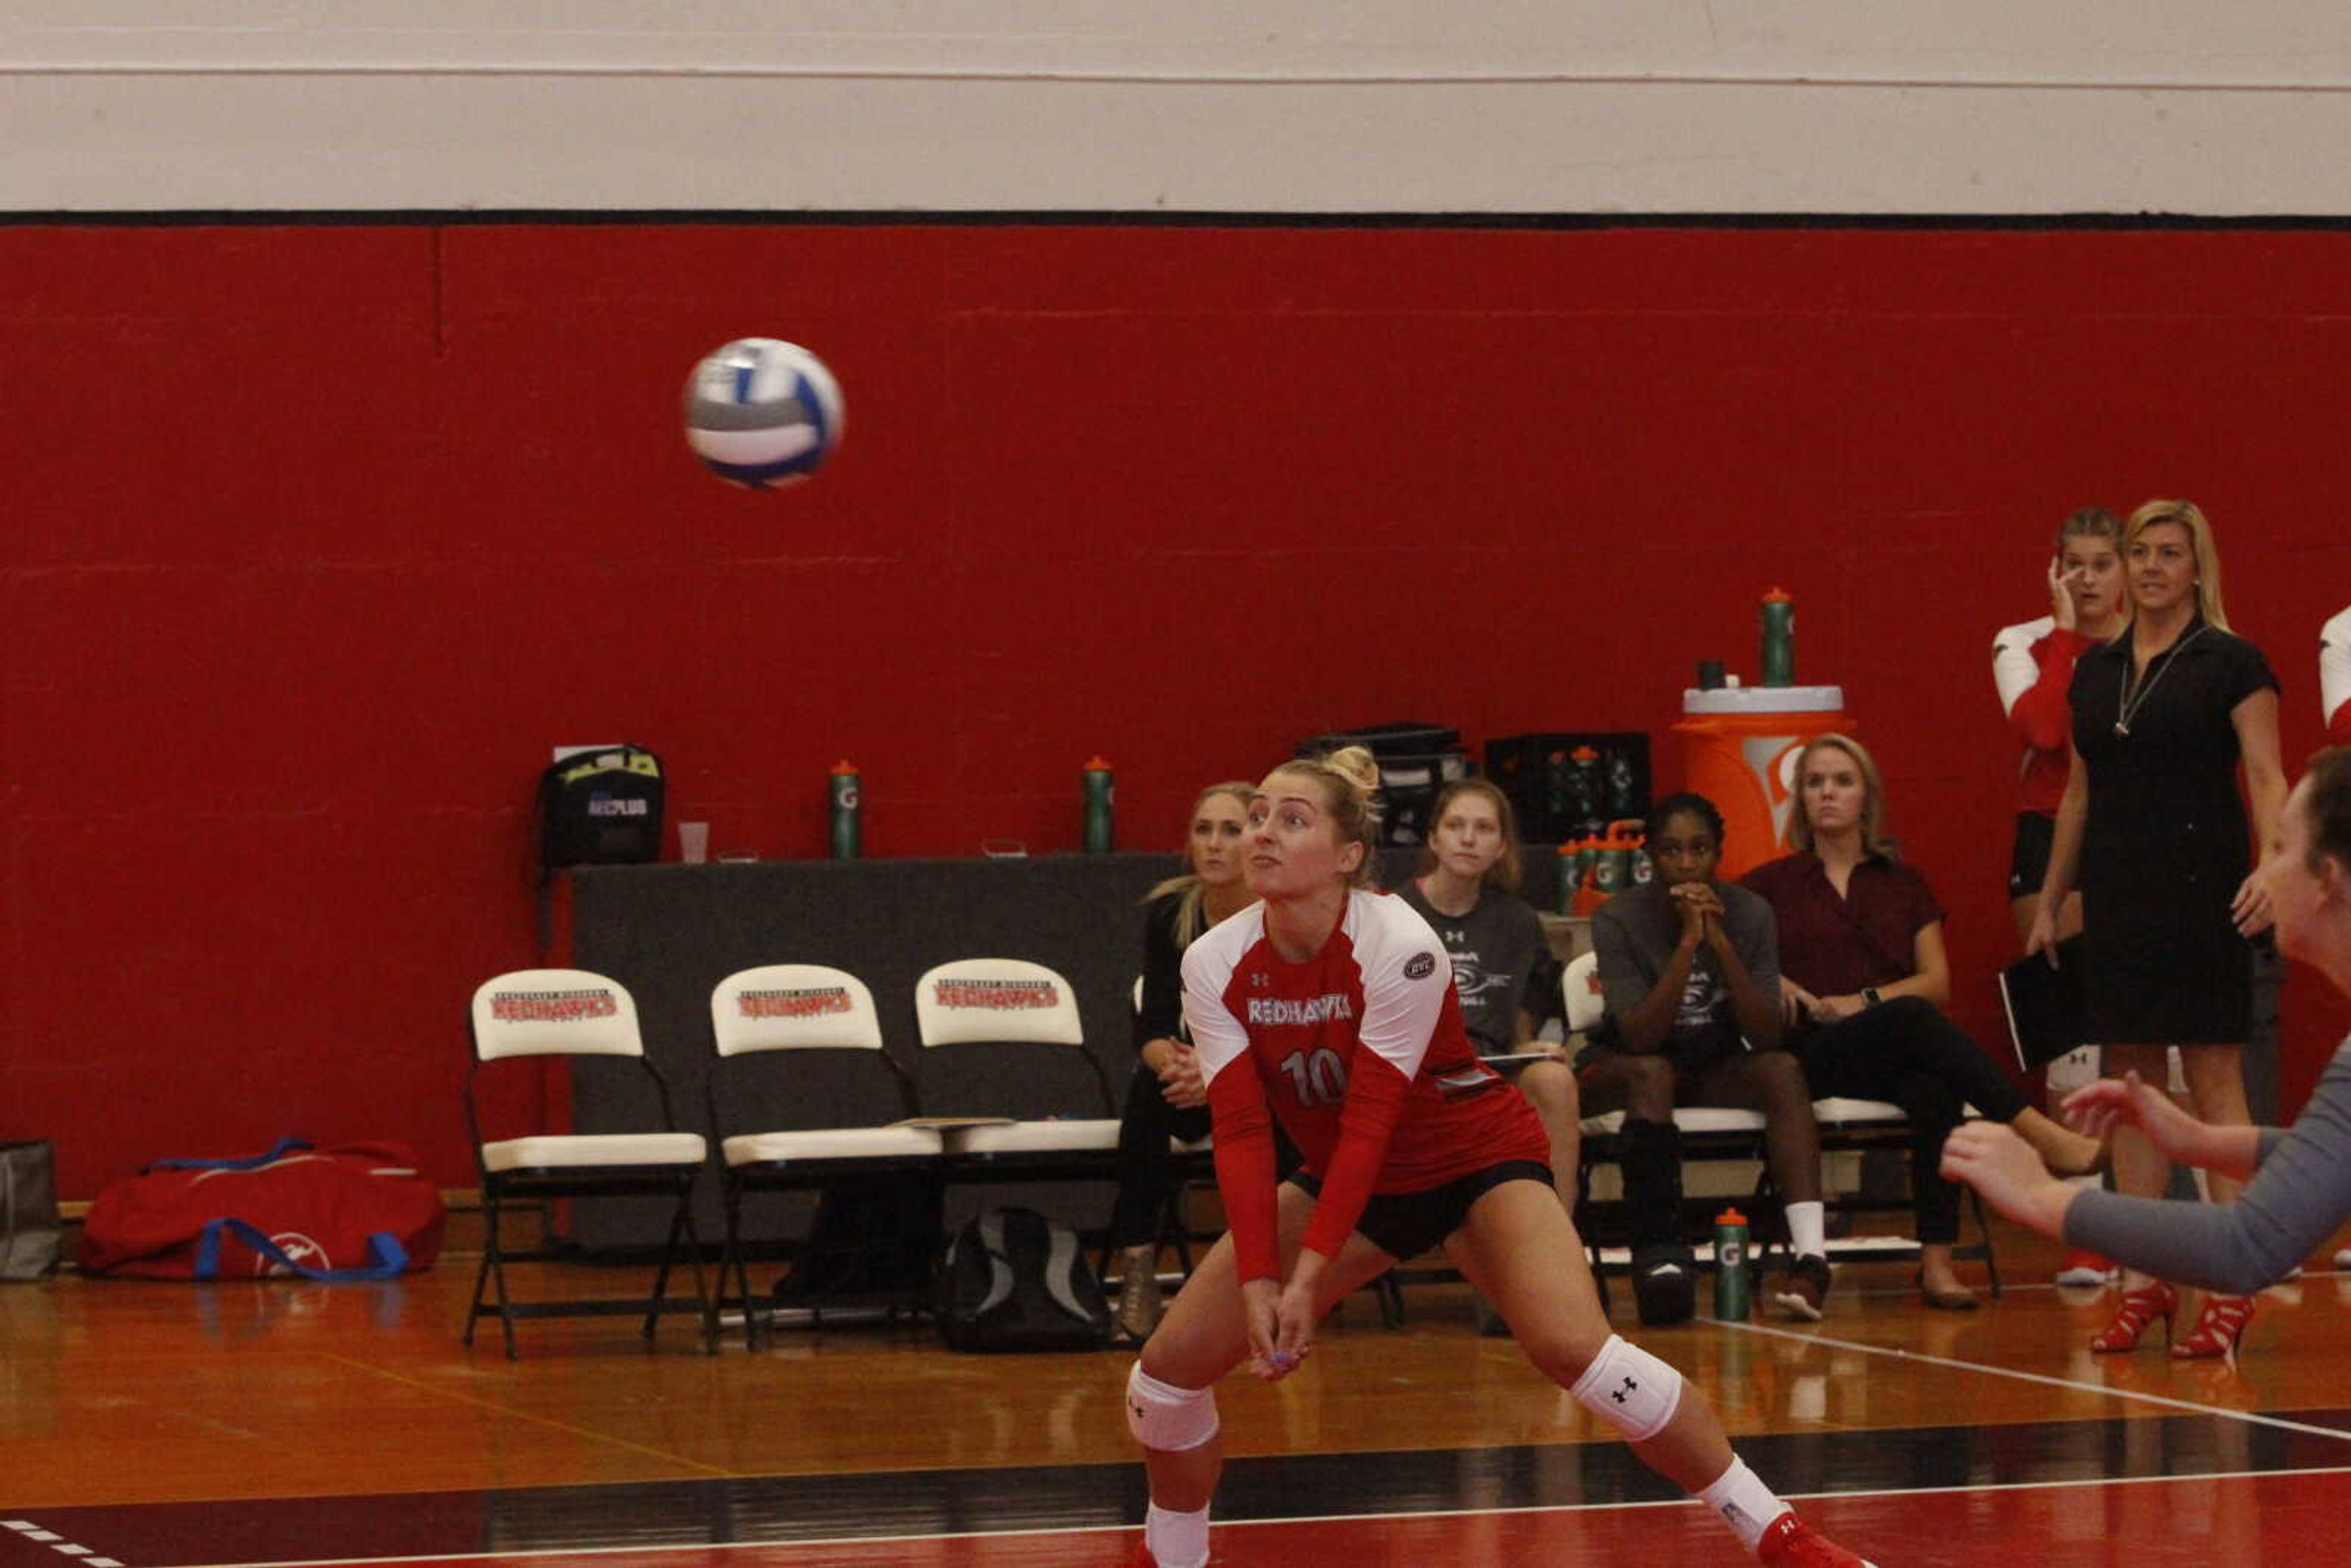 Senior Madeline Grimm bumps the ball back to the opponent's side during the Redhawks Invitational tournament Sept. 1 at Hock Fieldhouse.